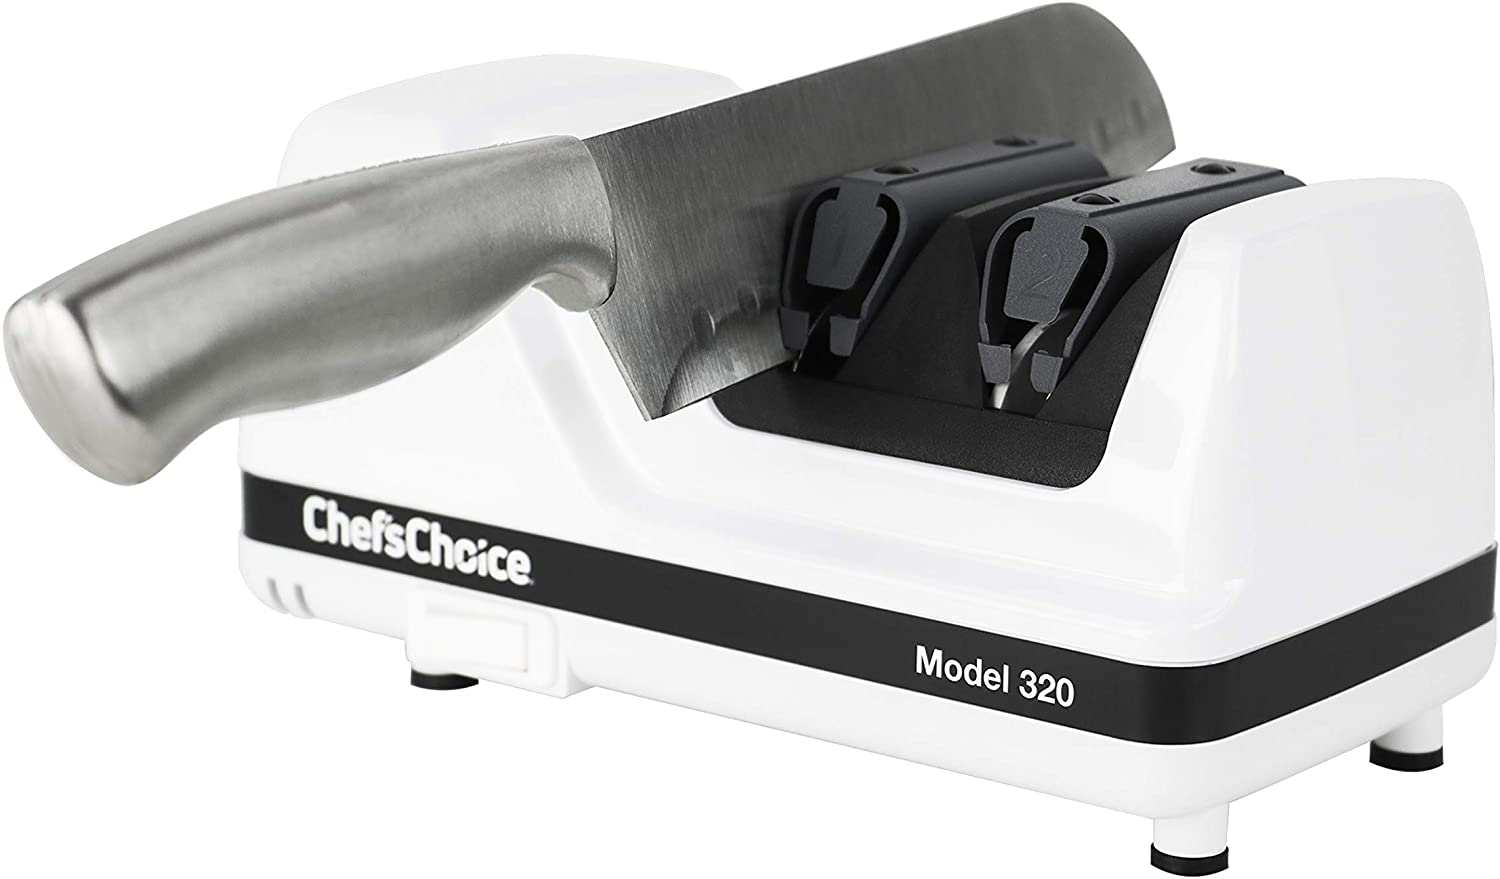 Chef'sChoice Trizor XV EdgeSelect Professional Electric Knife Sharpener with 100-Percent Diamond Abrasives and Precision Angle Guides for Straight Edge and Serrated Knives, 3-stage, Gray